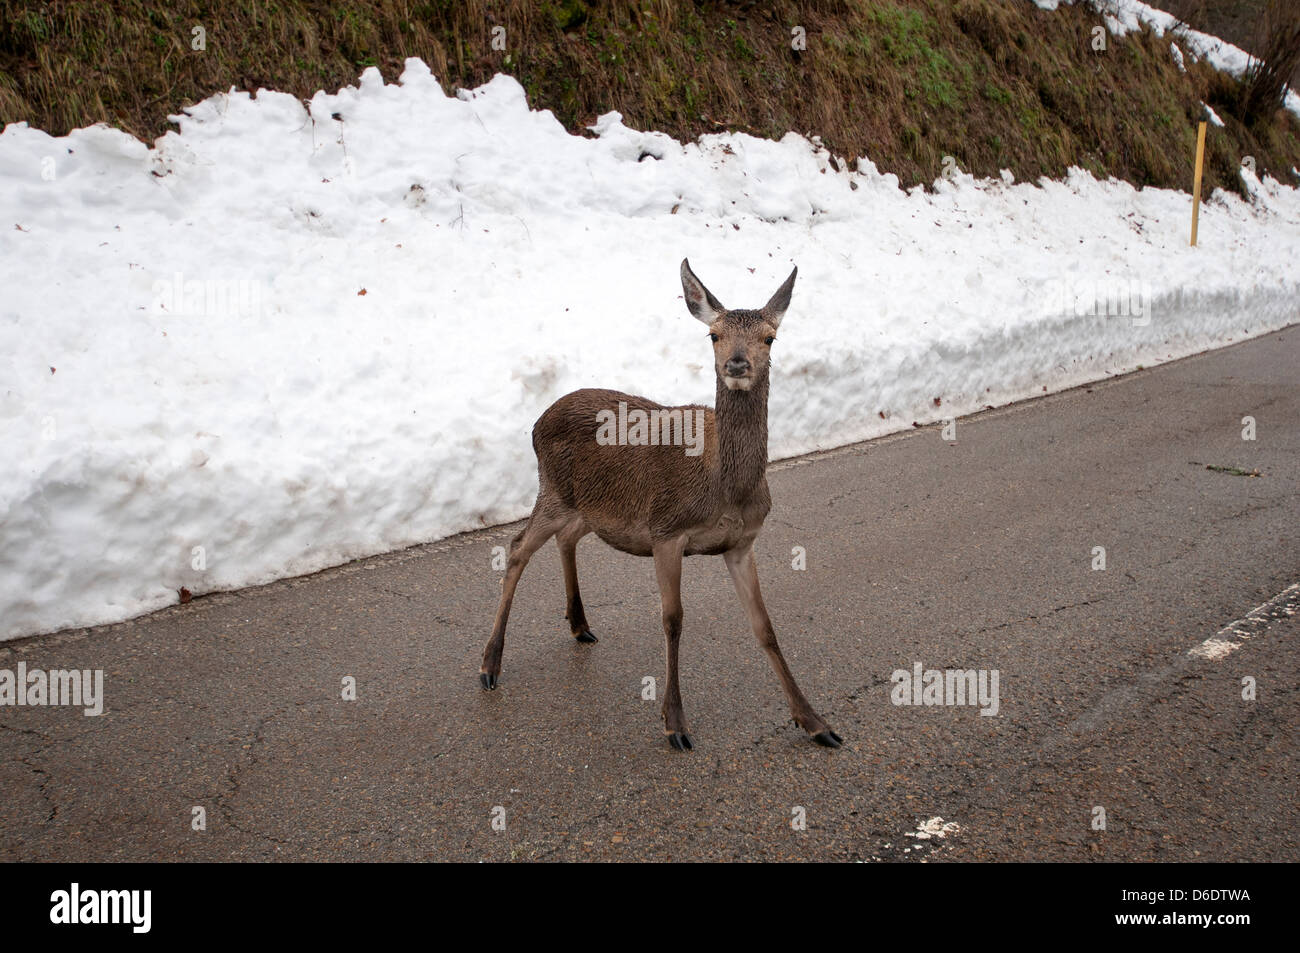 Small baby deer in a road in winter Stock Photo